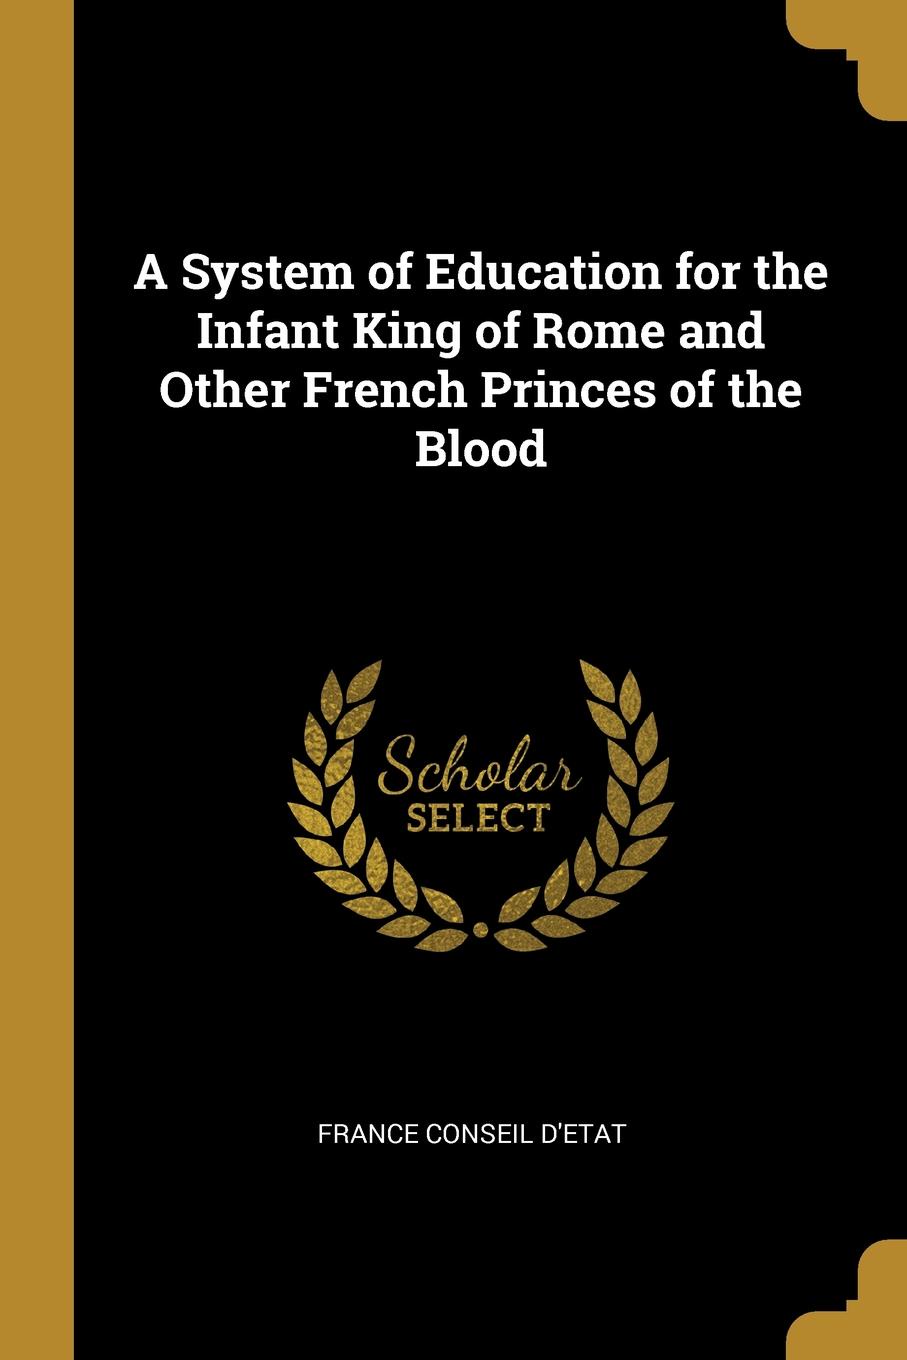 A System of Education for the Infant King of Rome and Other French Princes of the Blood